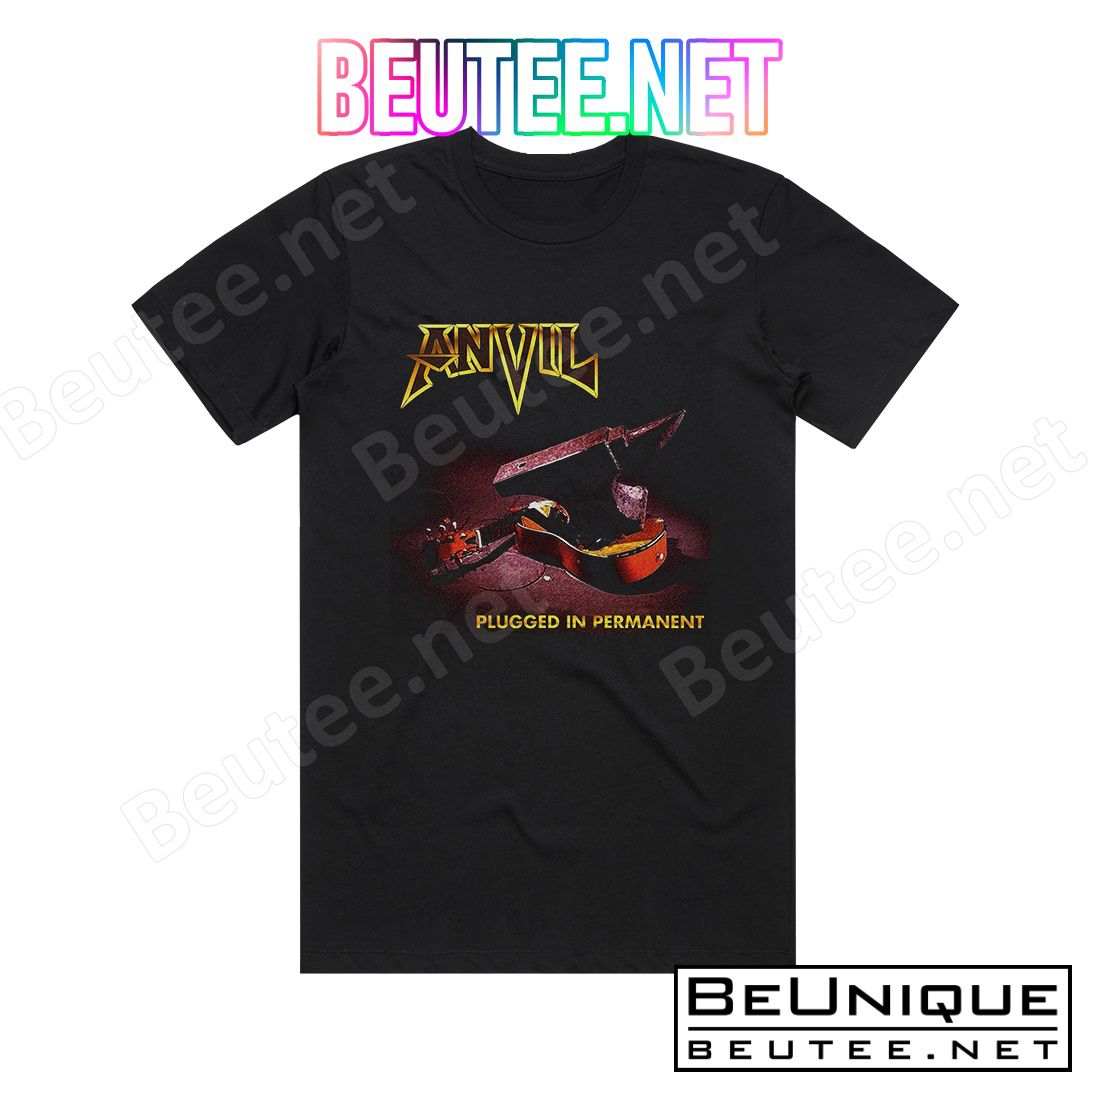 Anvil Plugged In Permanent Album Cover T-Shirt